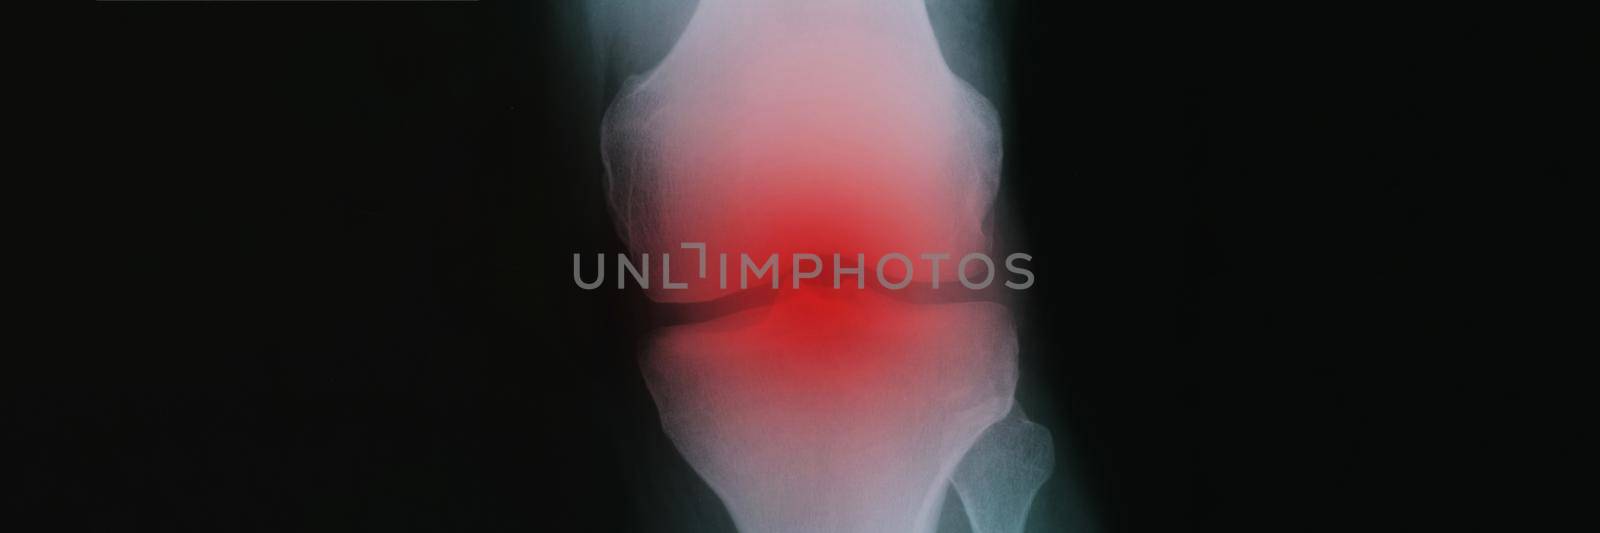 X ray with red inflammation of knee joint closeup. Diagnosis and treatment of arthritis concept